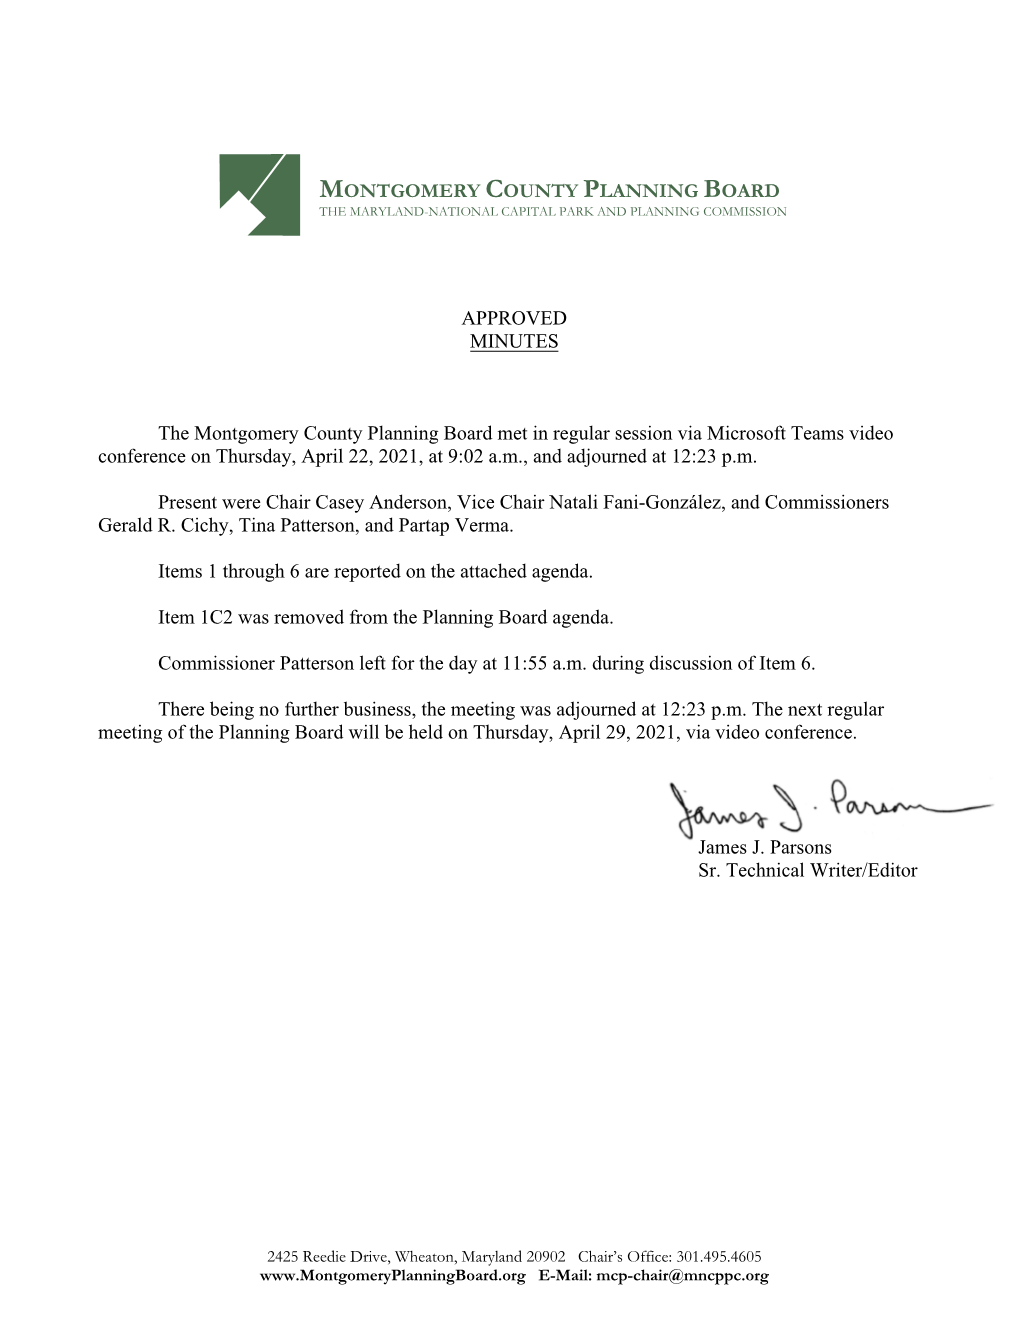 APPROVED MINUTES the Montgomery County Planning